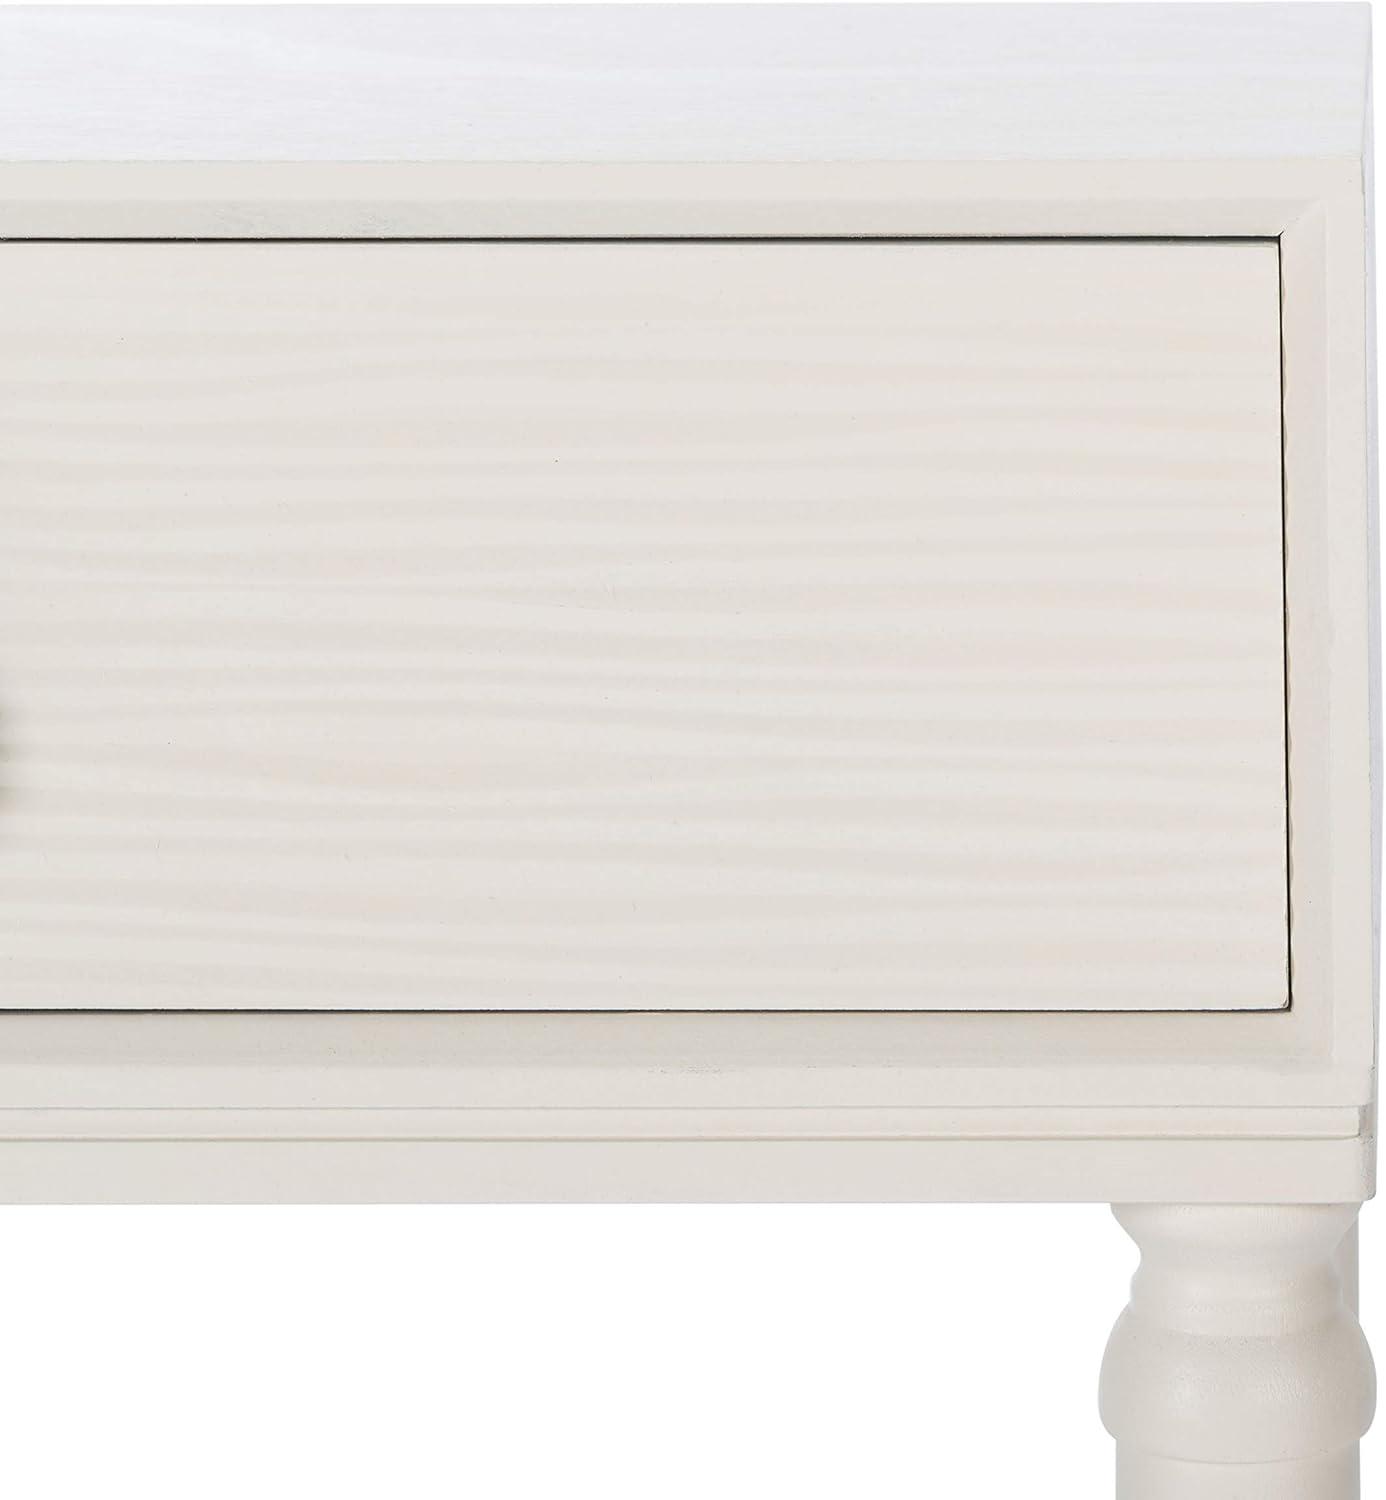 Riviera Elegance White 2-Drawer Carved Console Table with Storage